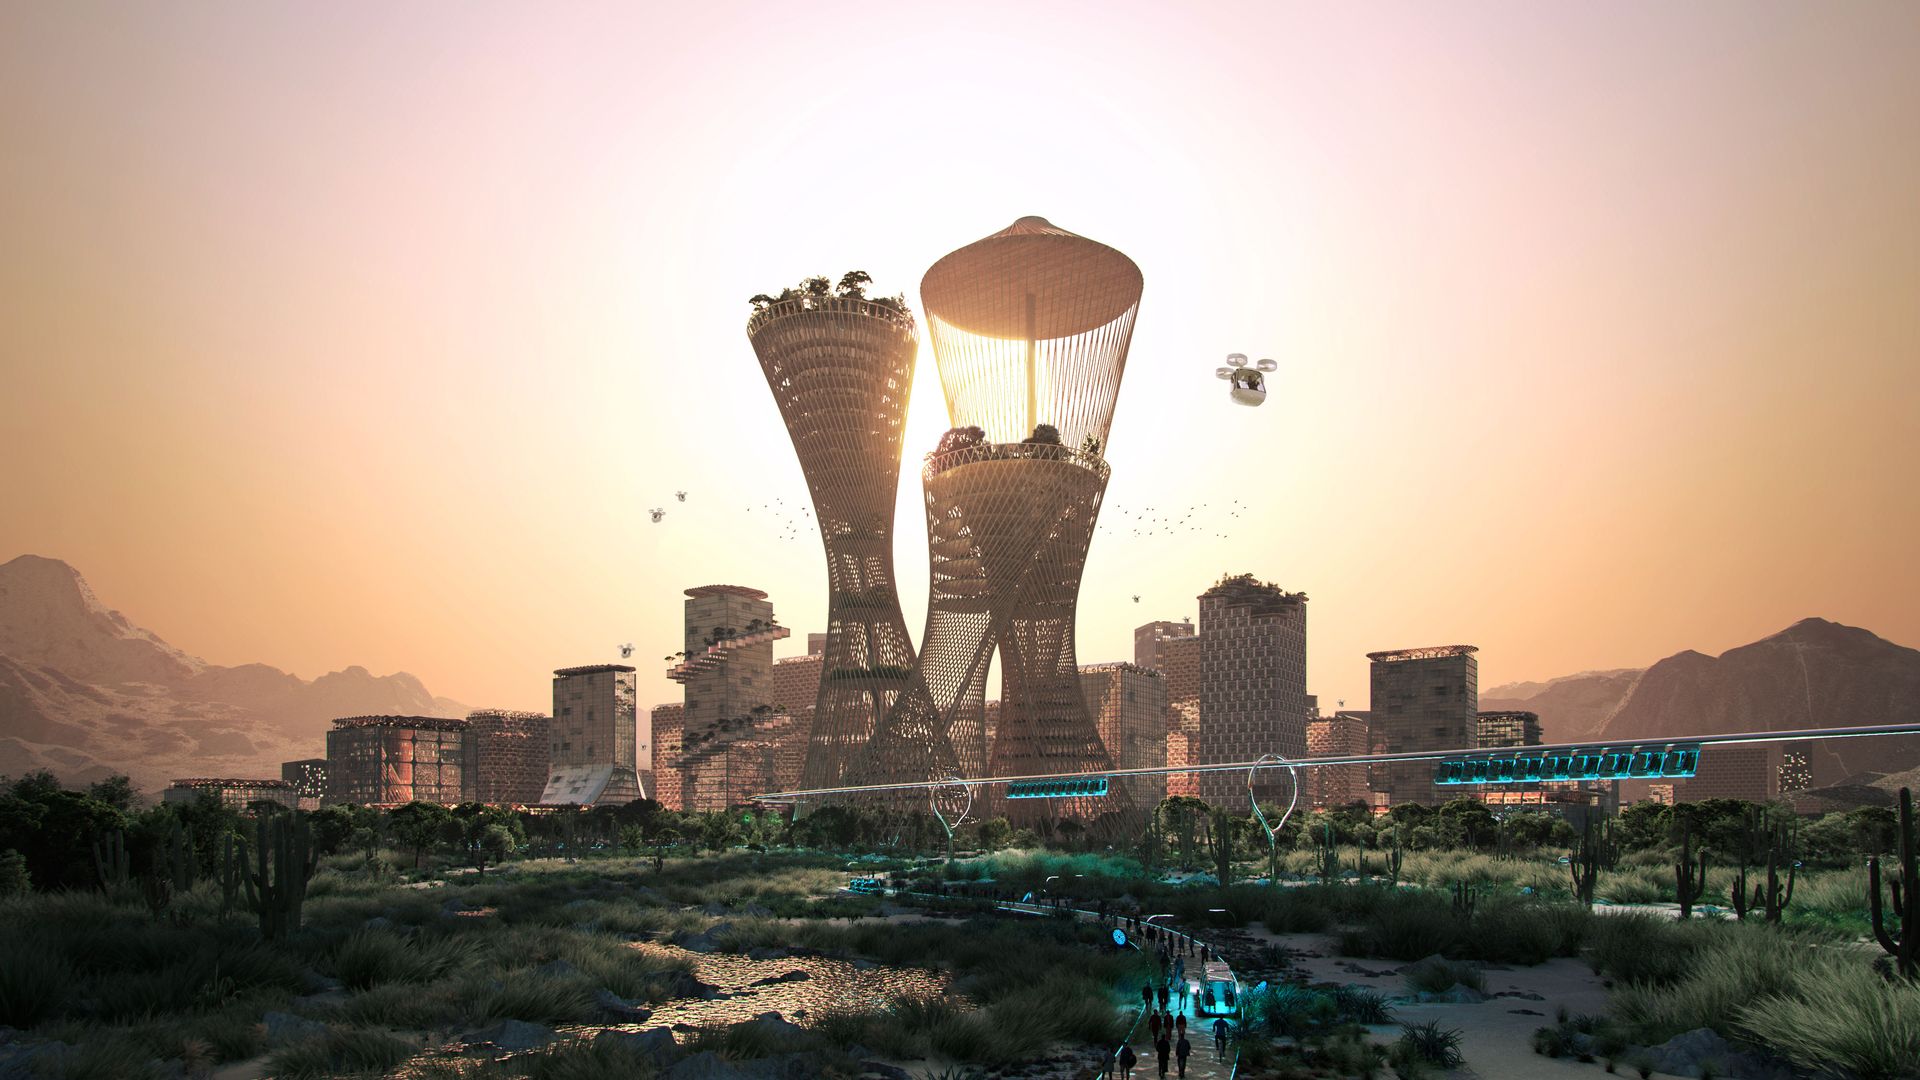 View of a futuristic city with residential towers and drones.